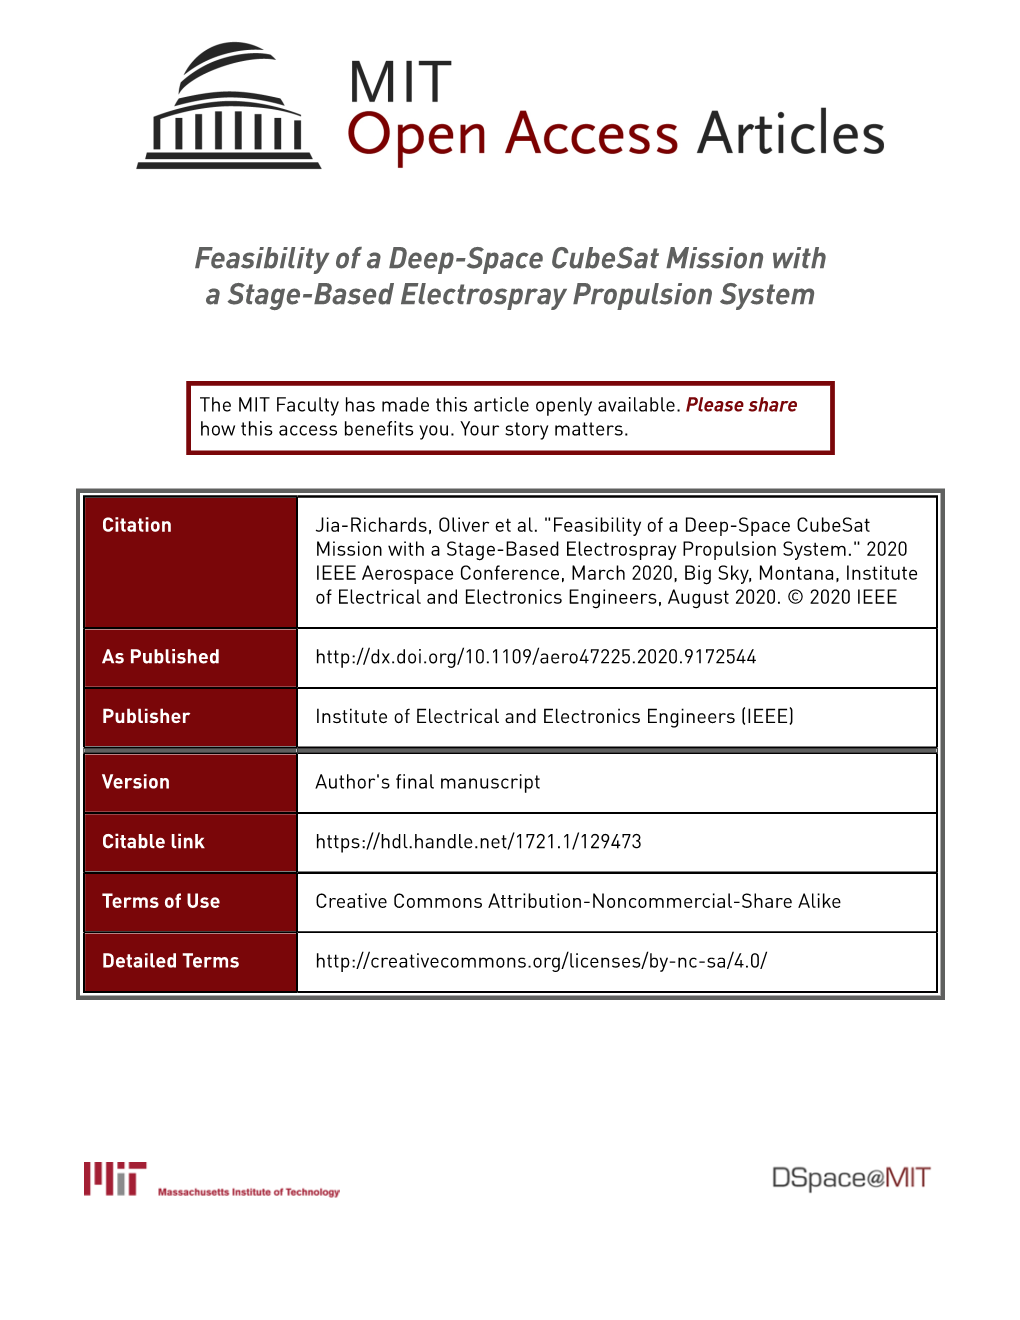 Feasibility of a Deep-Space Cubesat Mission with a Stage-Based Electrospray Propulsion System